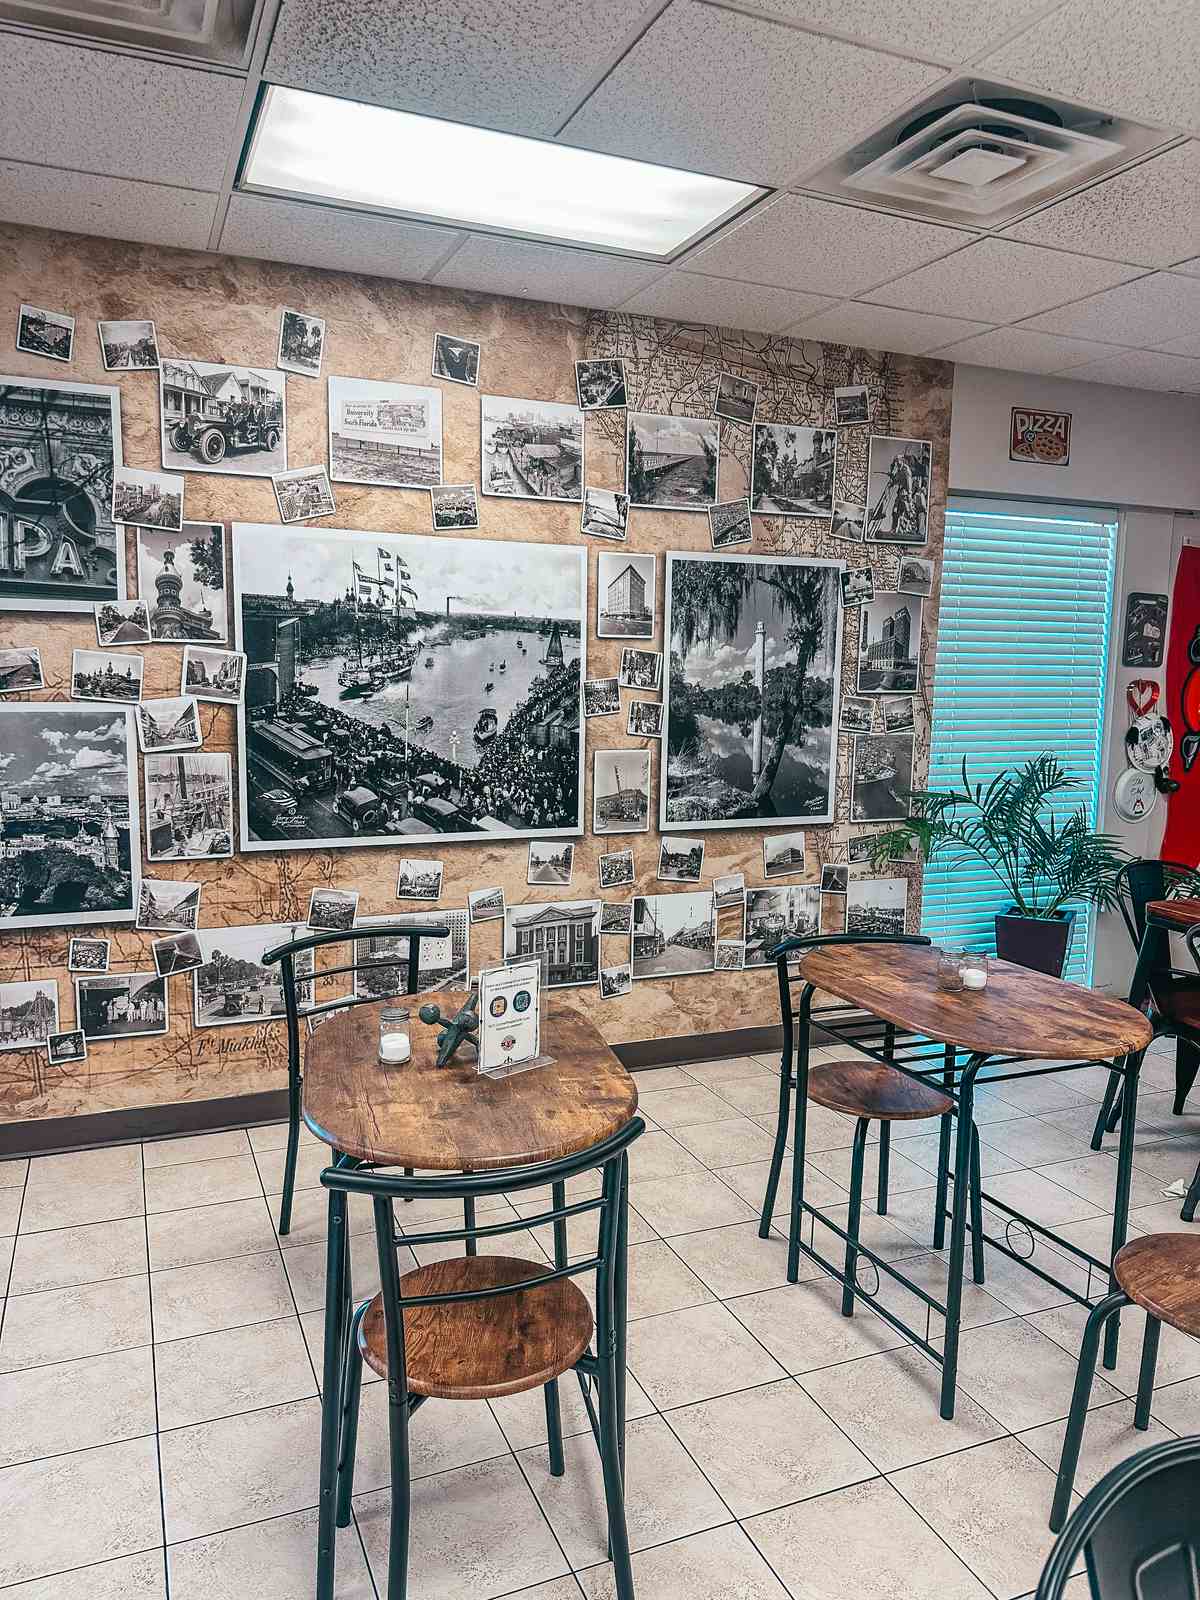 The Cracked Pepper Cafe in Tampa